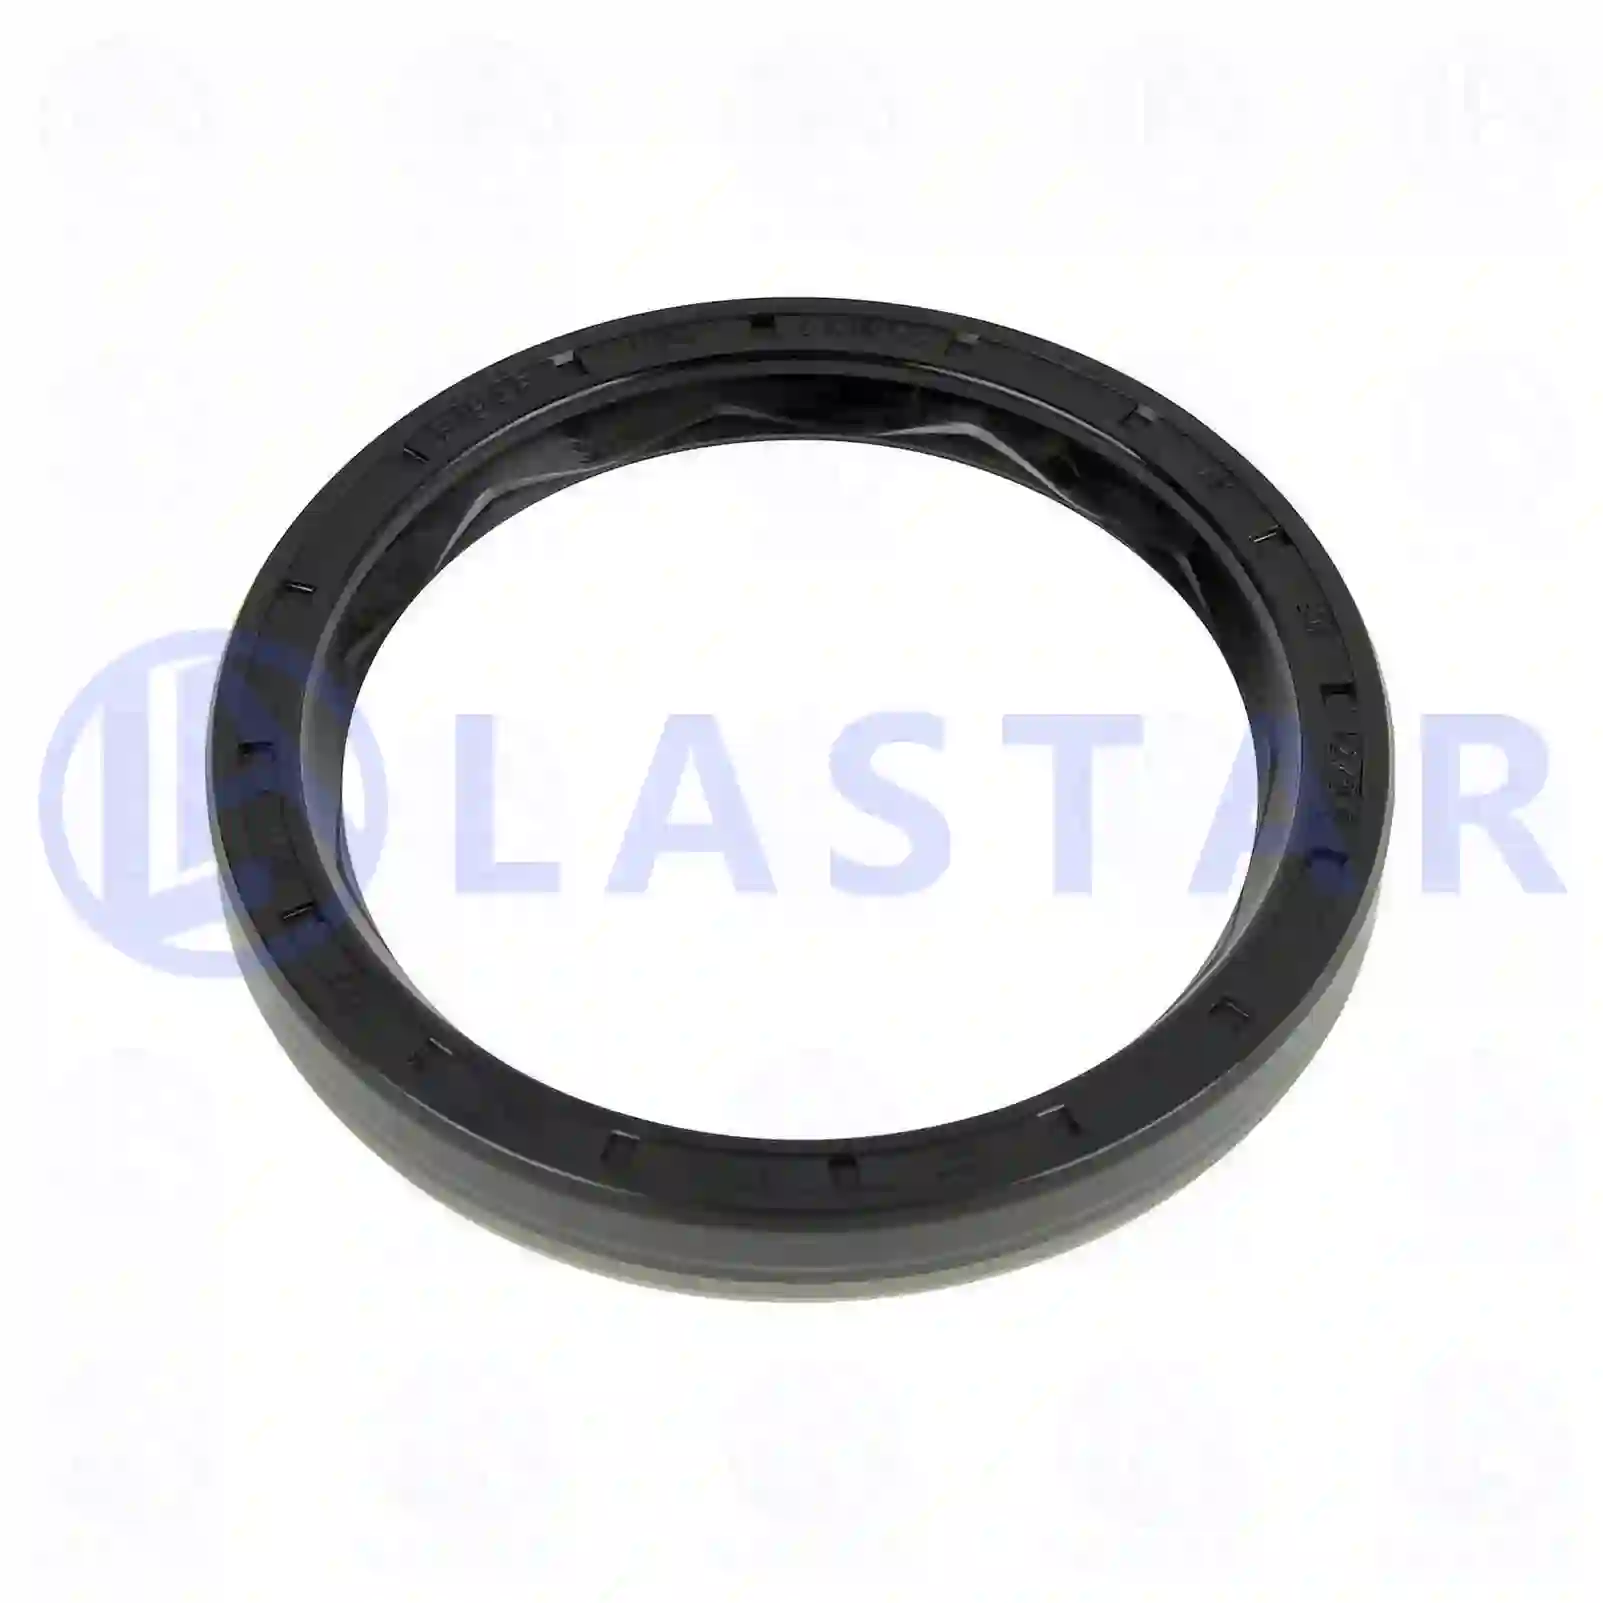 Oil seal, 77726214, 42534371, 93163220, 0249975547, 1426876, ||  77726214 Lastar Spare Part | Truck Spare Parts, Auotomotive Spare Parts Oil seal, 77726214, 42534371, 93163220, 0249975547, 1426876, ||  77726214 Lastar Spare Part | Truck Spare Parts, Auotomotive Spare Parts